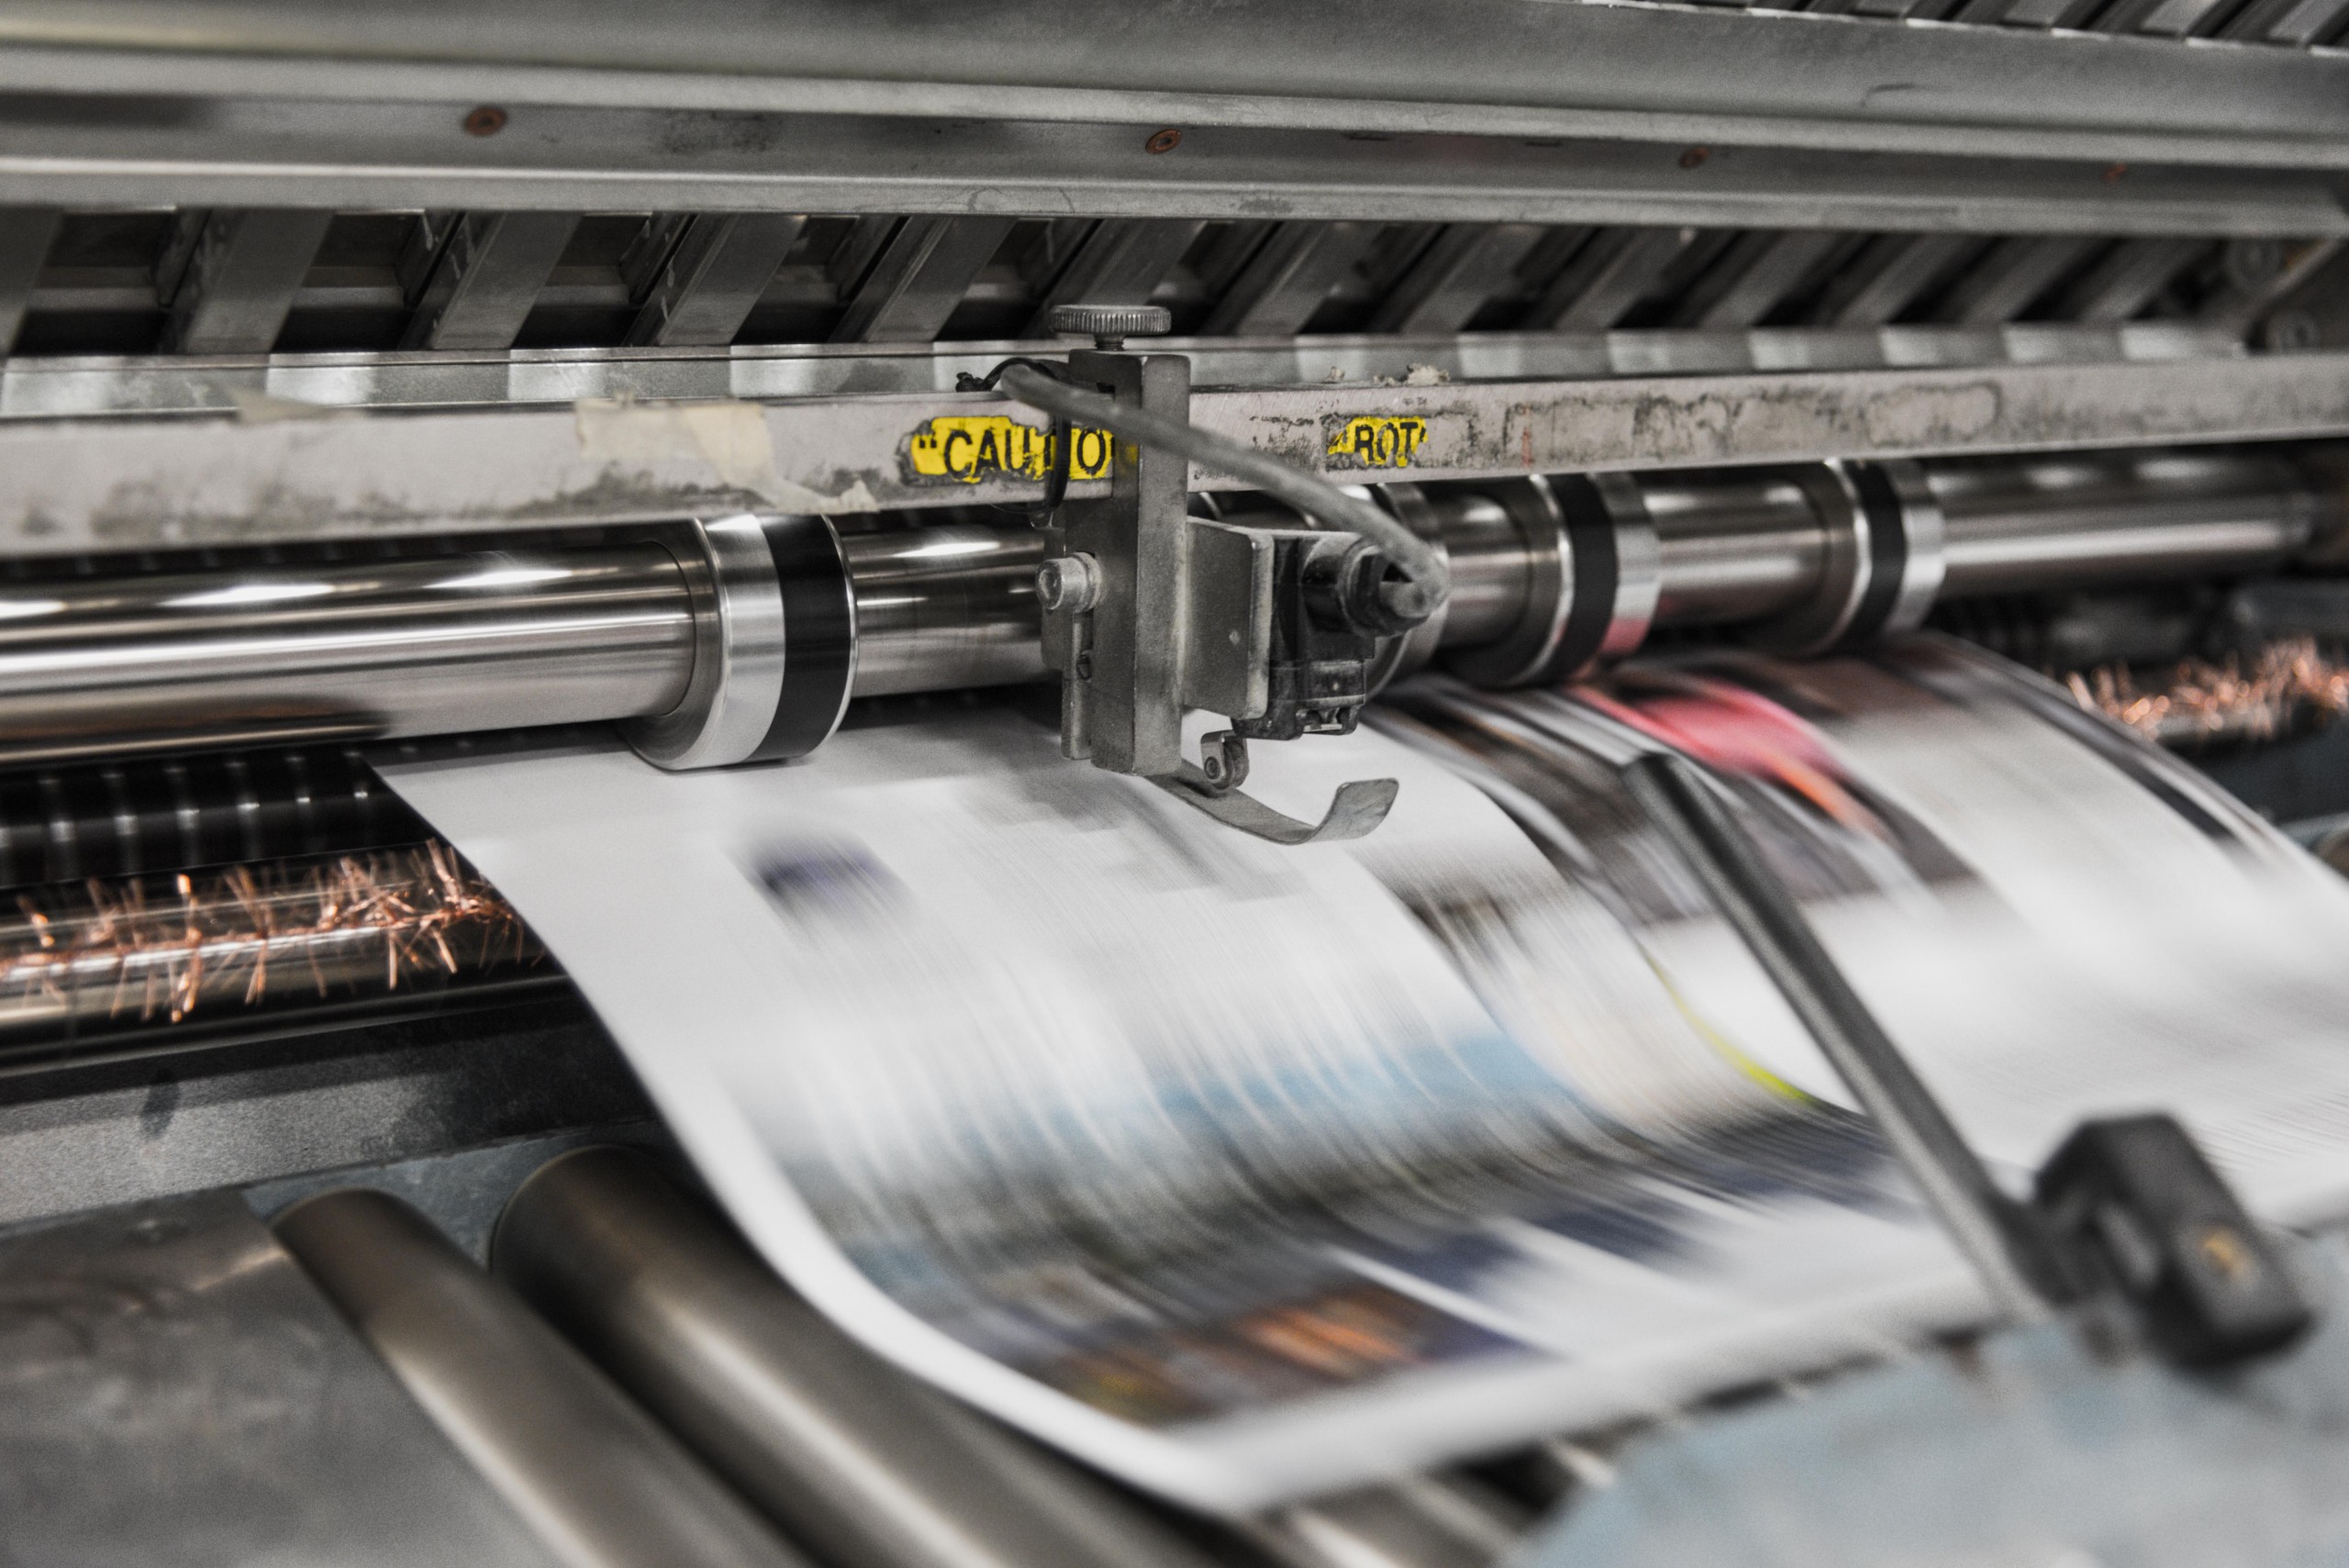 How It’s Made: Newspapers